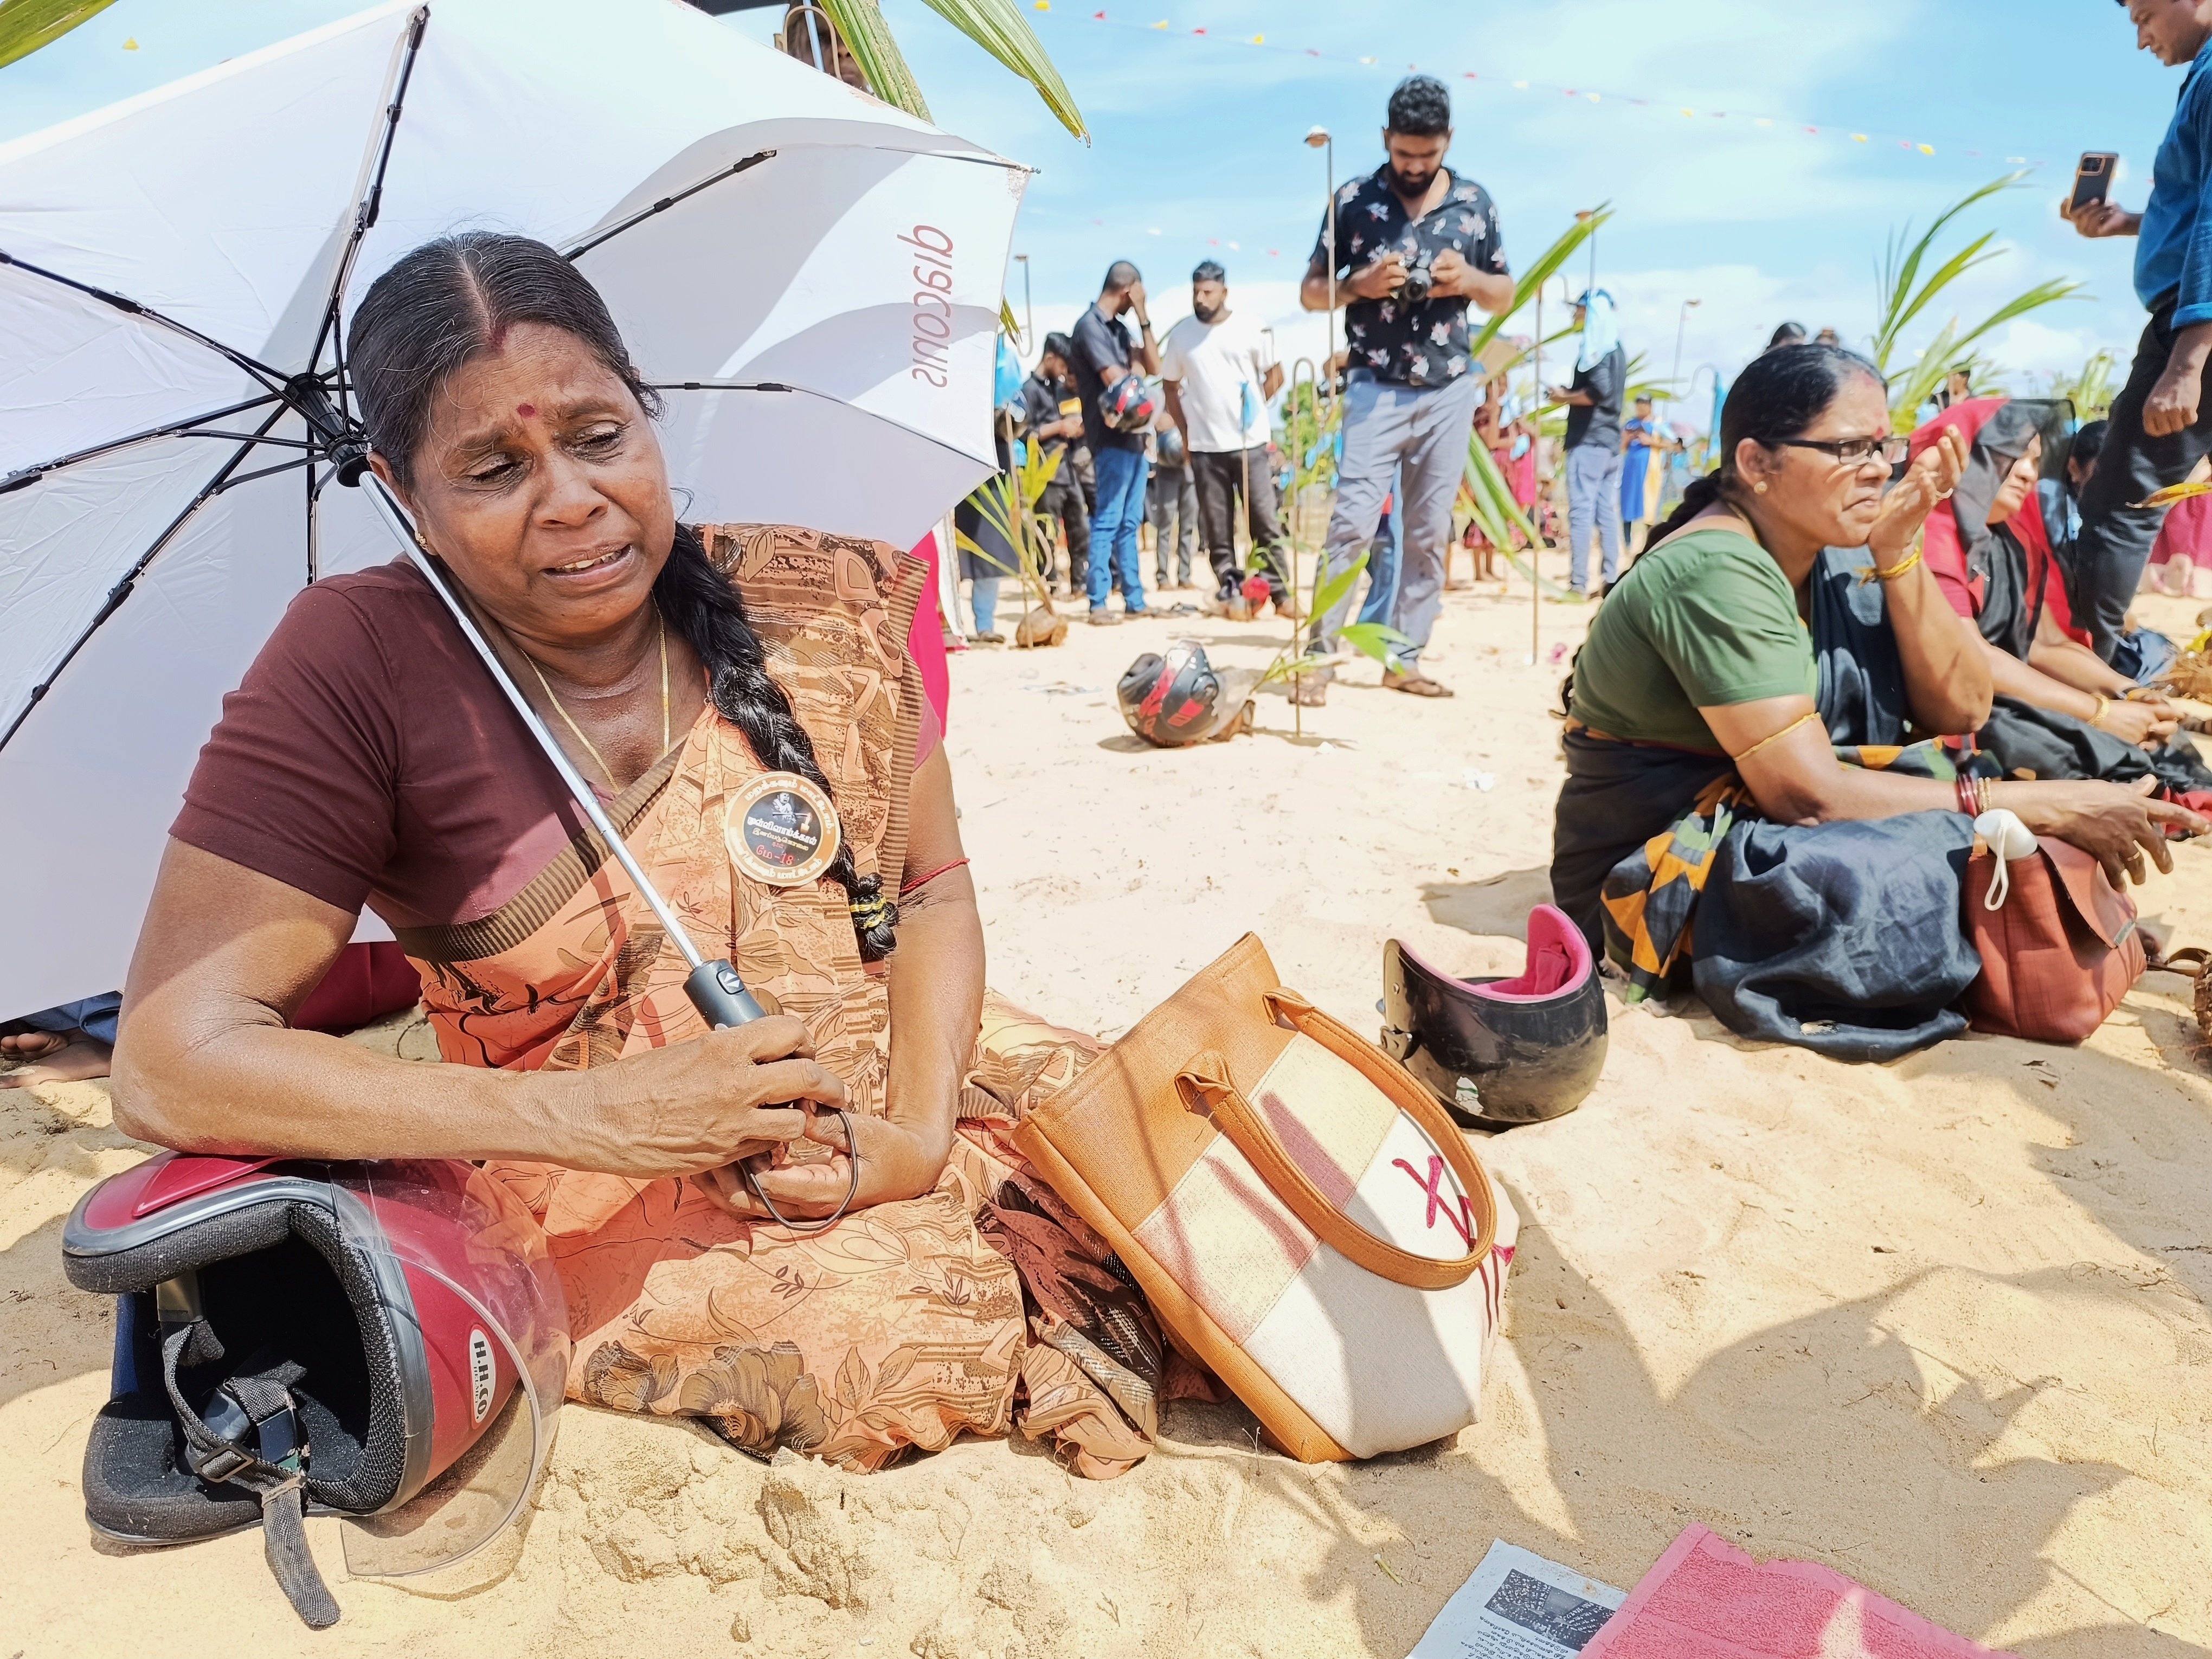  A Tamil mother mourning at the commemoration held to remember the fallen Tamils at the Northern village of Mullivaikkal, on May 18, where, 15 years ago, the last battle of Sri Lanka’s civil war was fought. Photo: Dimuthu Attanayake